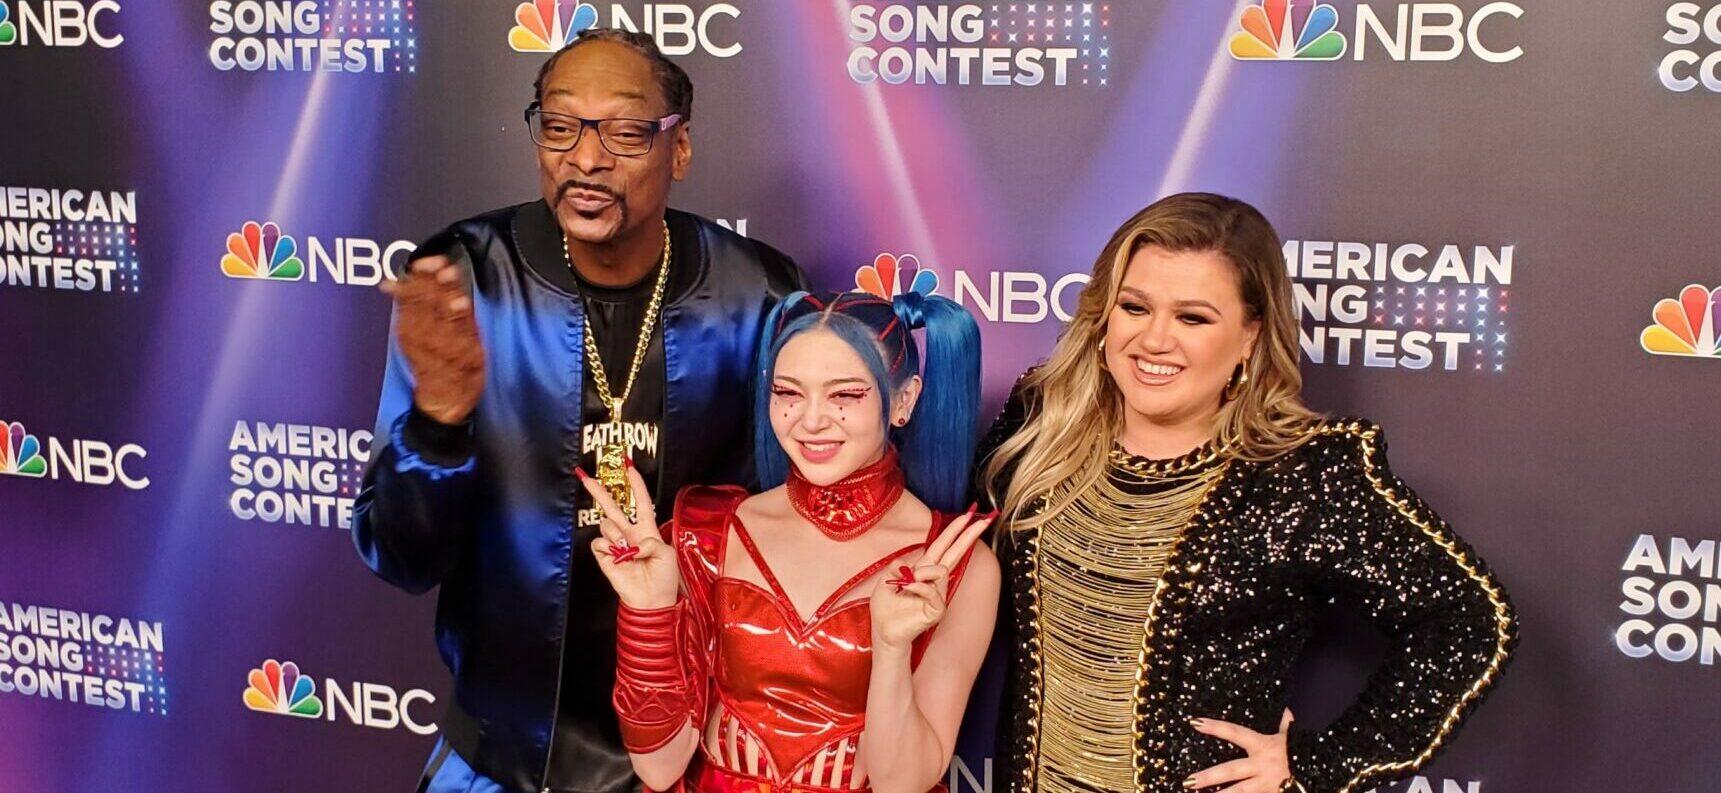 Alexa and Kelly Clarkson and Snoop Dogg backstage